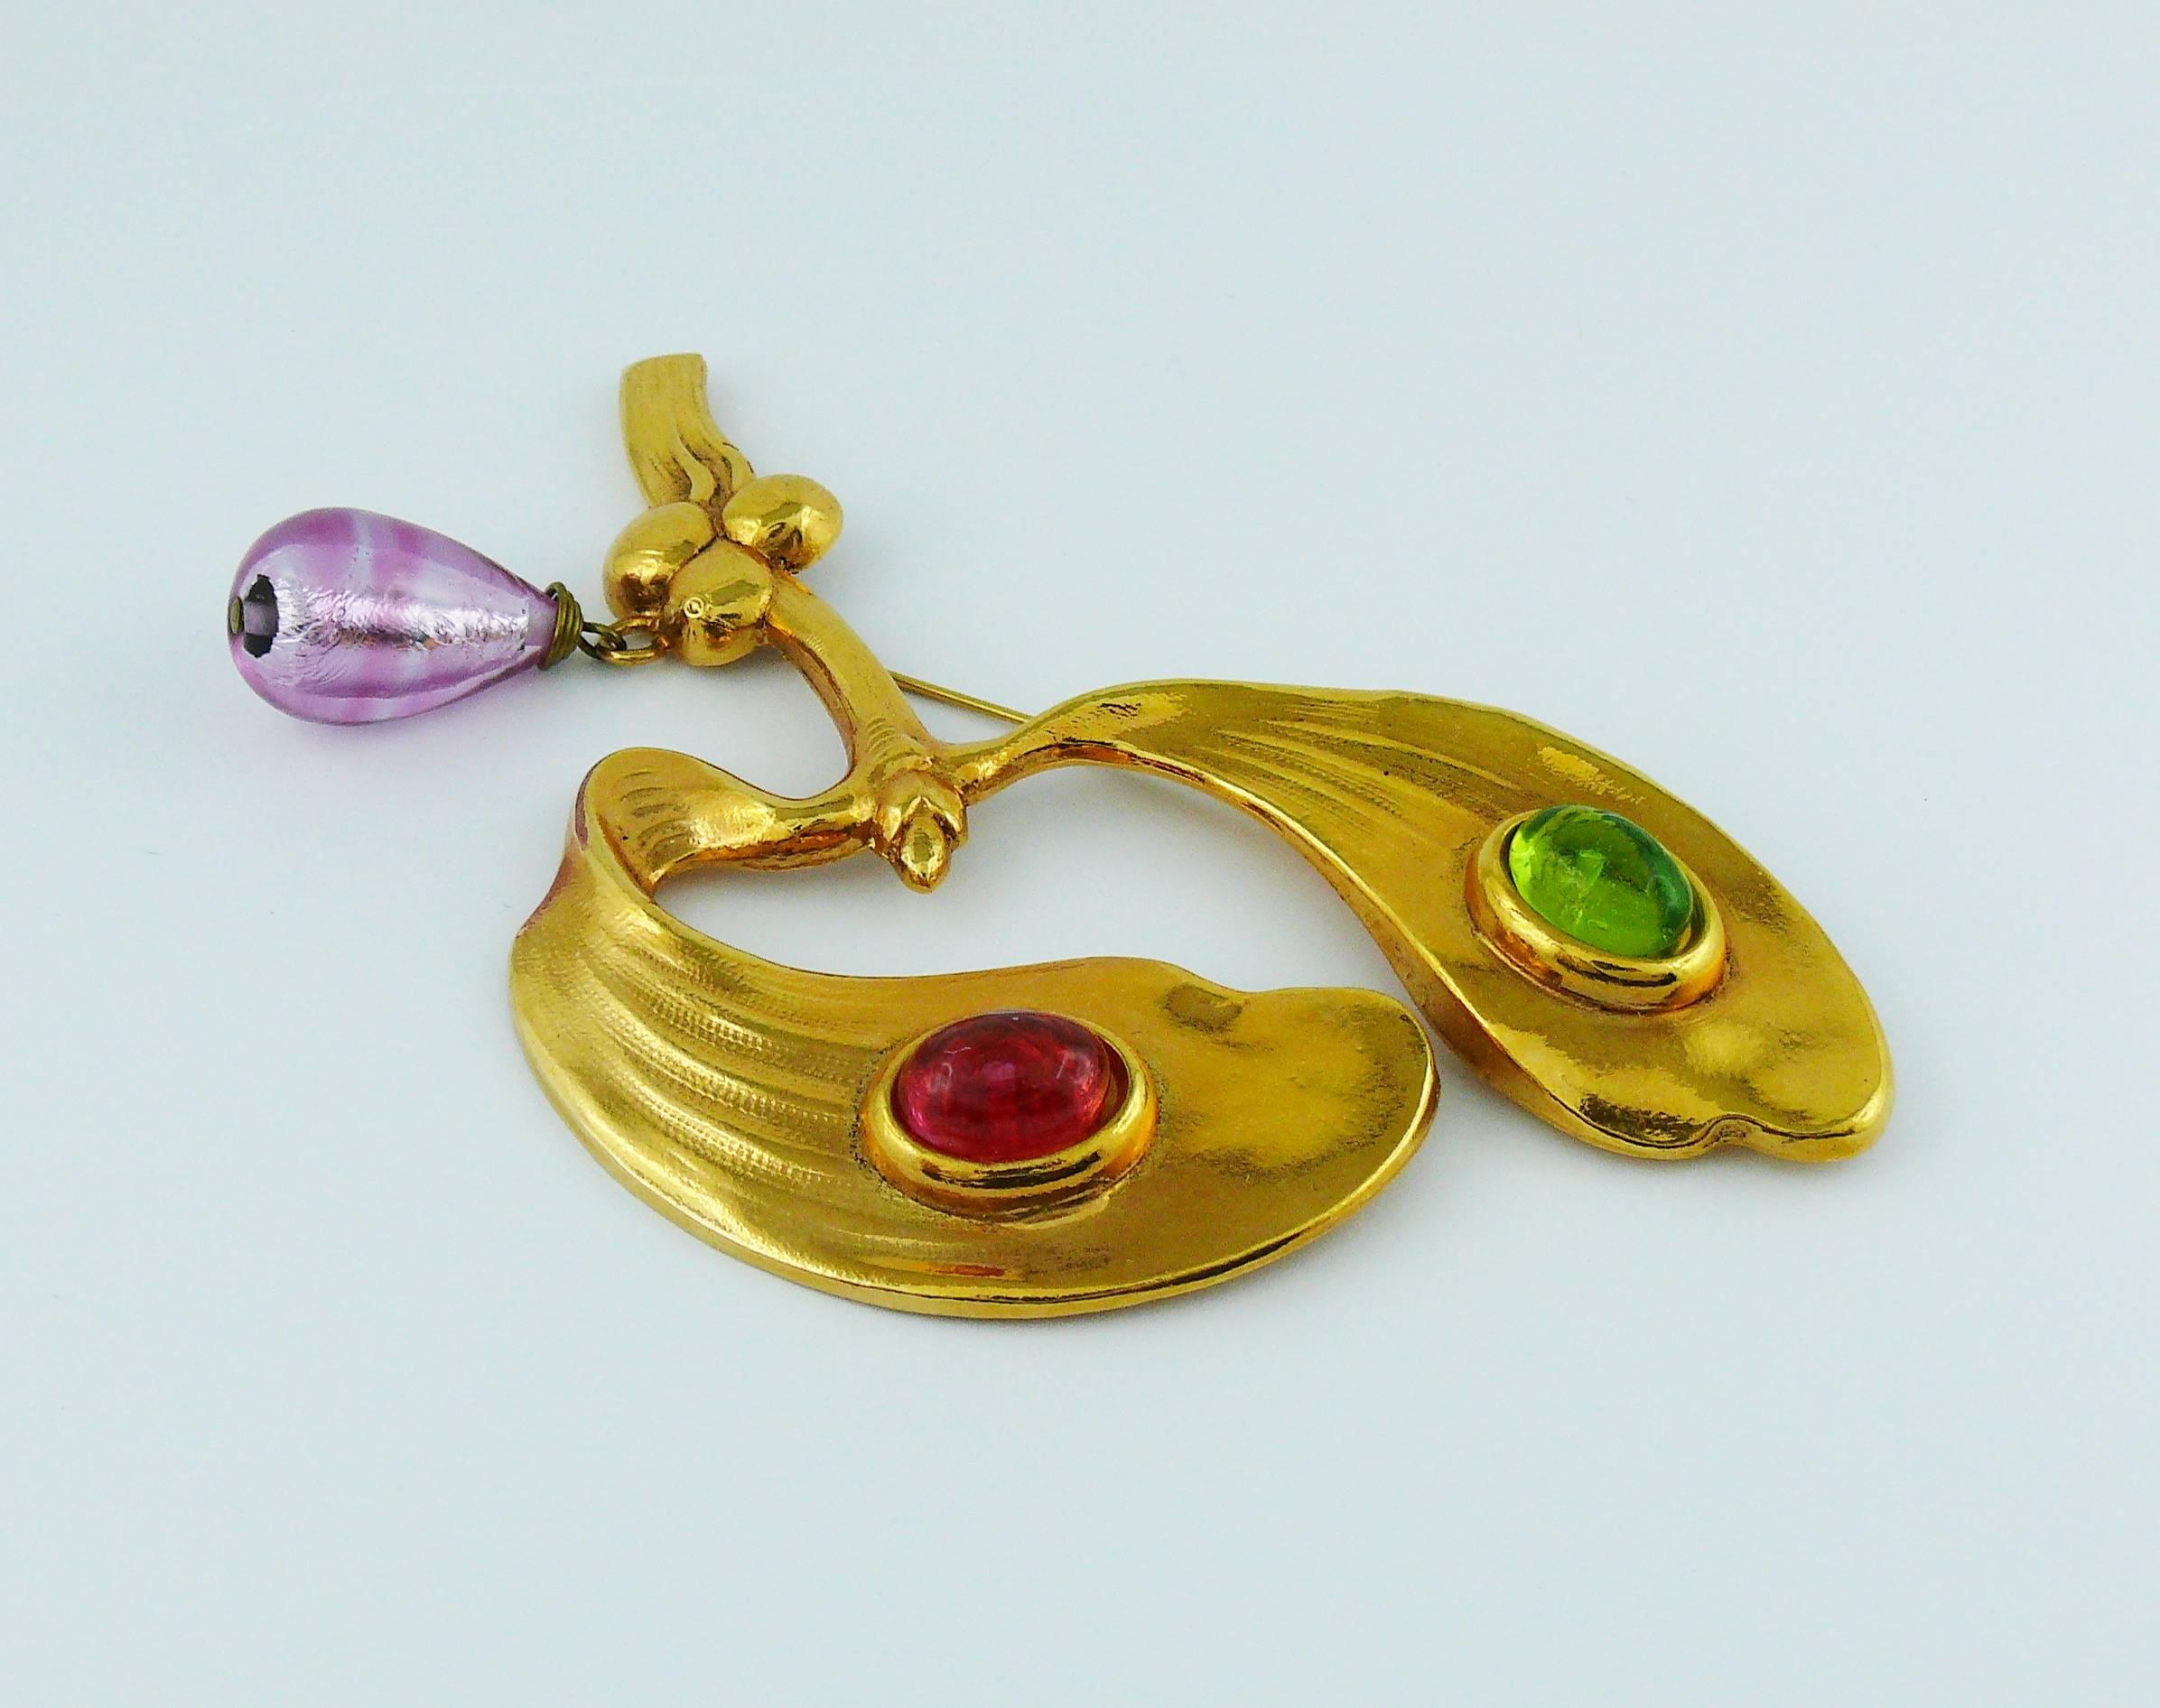 MERCEDES ROBIROSA vintage large gold toned naturalist brooch featuring an Art Nouveau inspired branch embellished with multicolored glass cabochons and glass drop.

Embossed MERCEDES ROBIROSA.

Indicative measurements : max. length approx. 12 cm